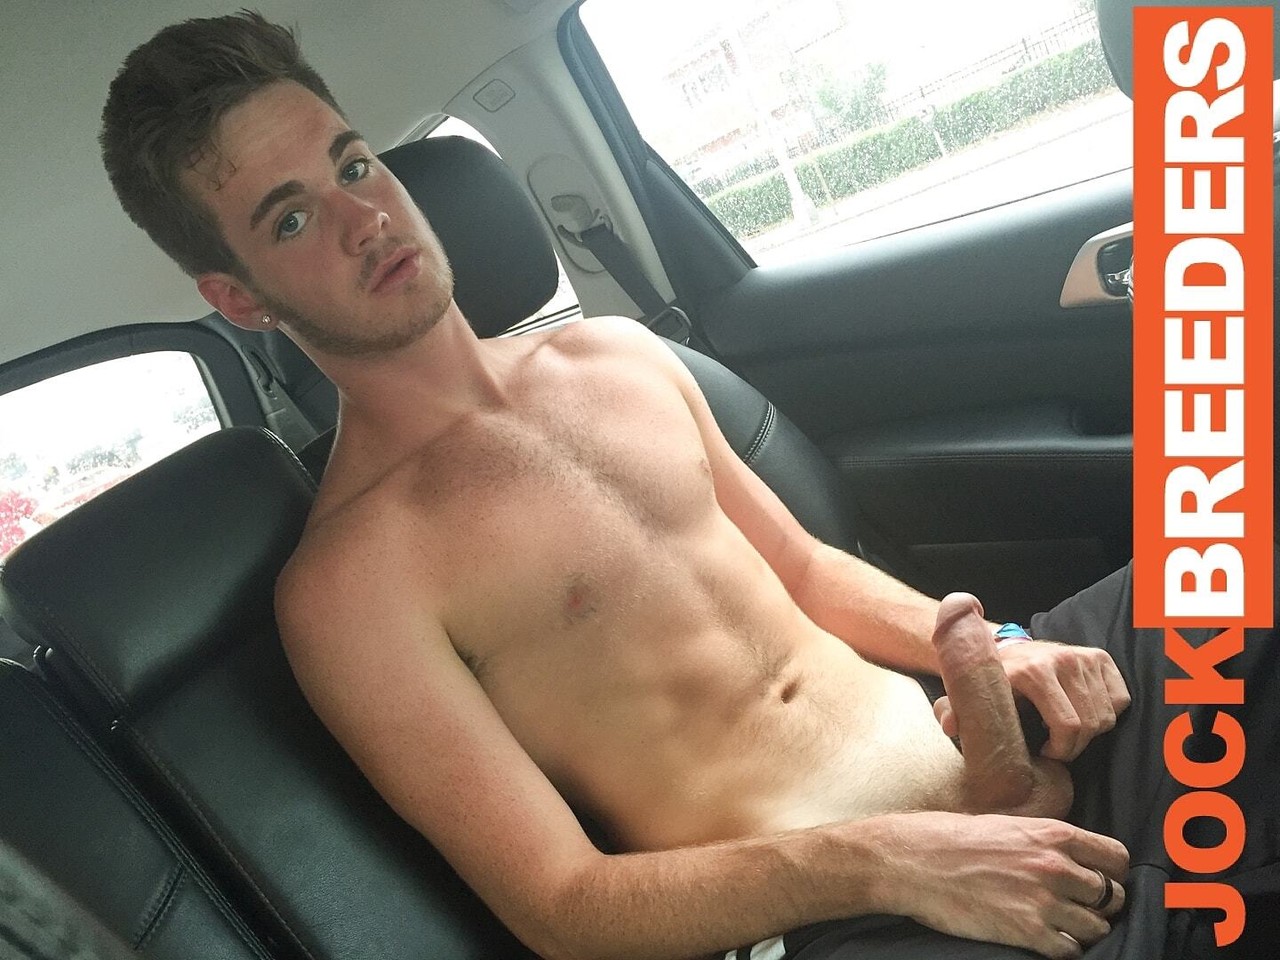 Gay beauty Benji Banks shamelessly stripping and masturbating in the cab  